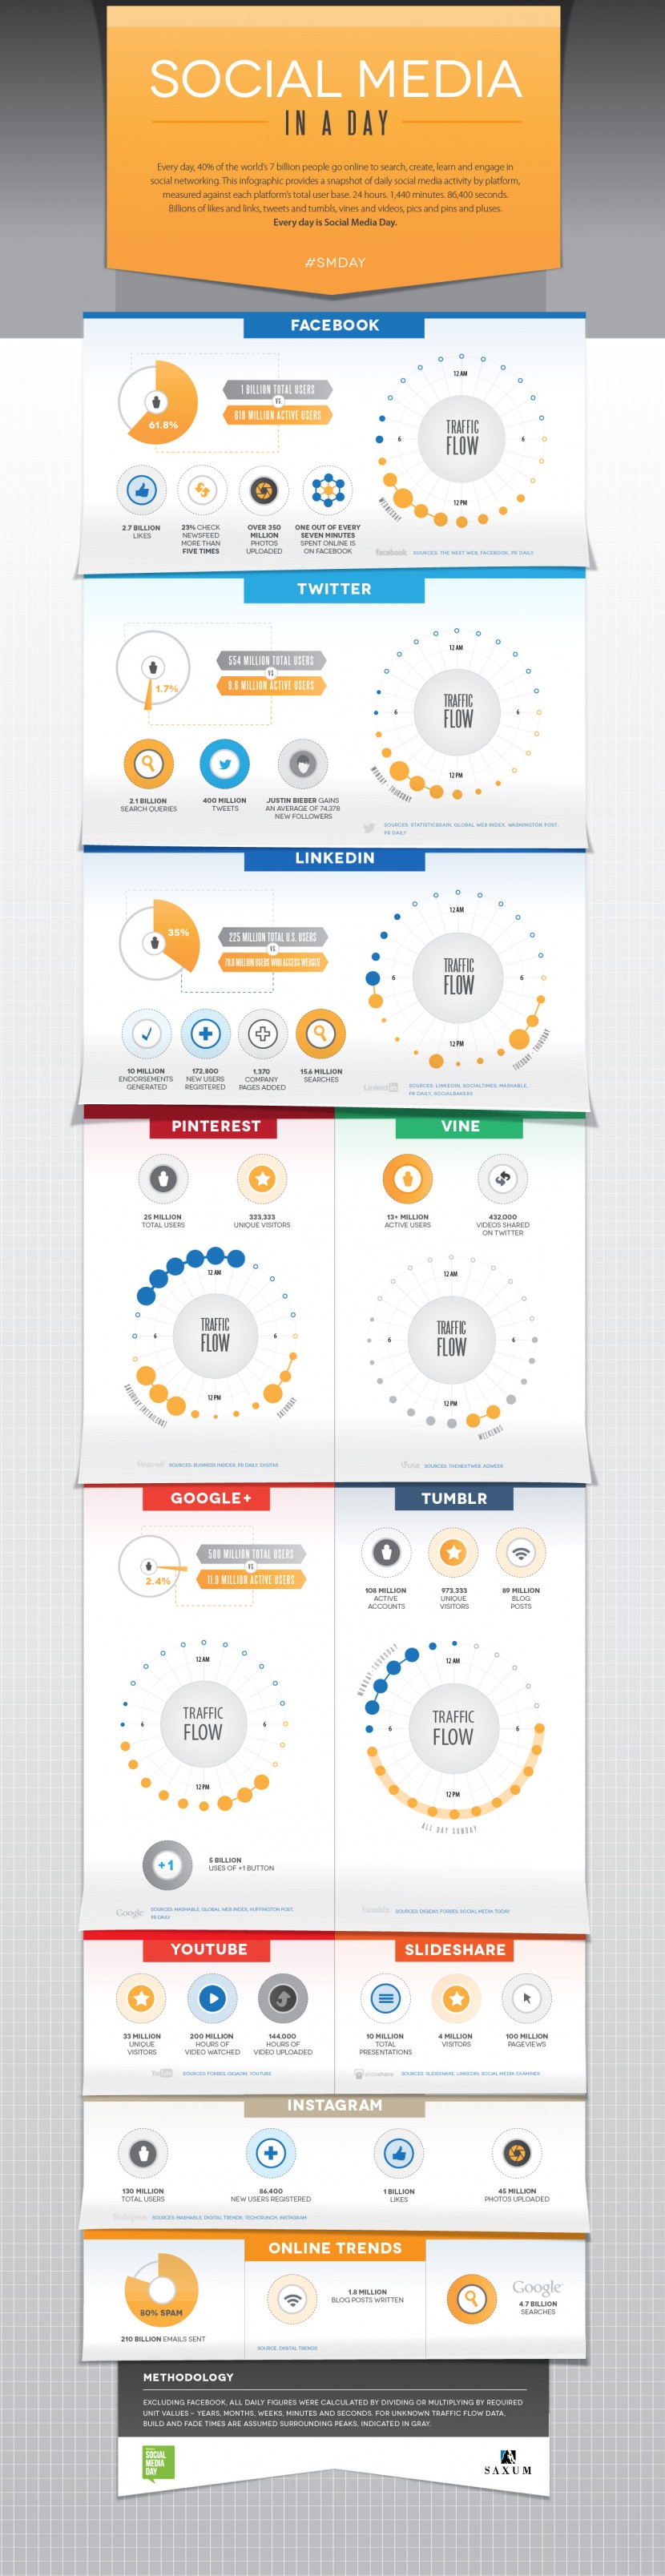 Infographie 14 - social-media-a-day-infographic